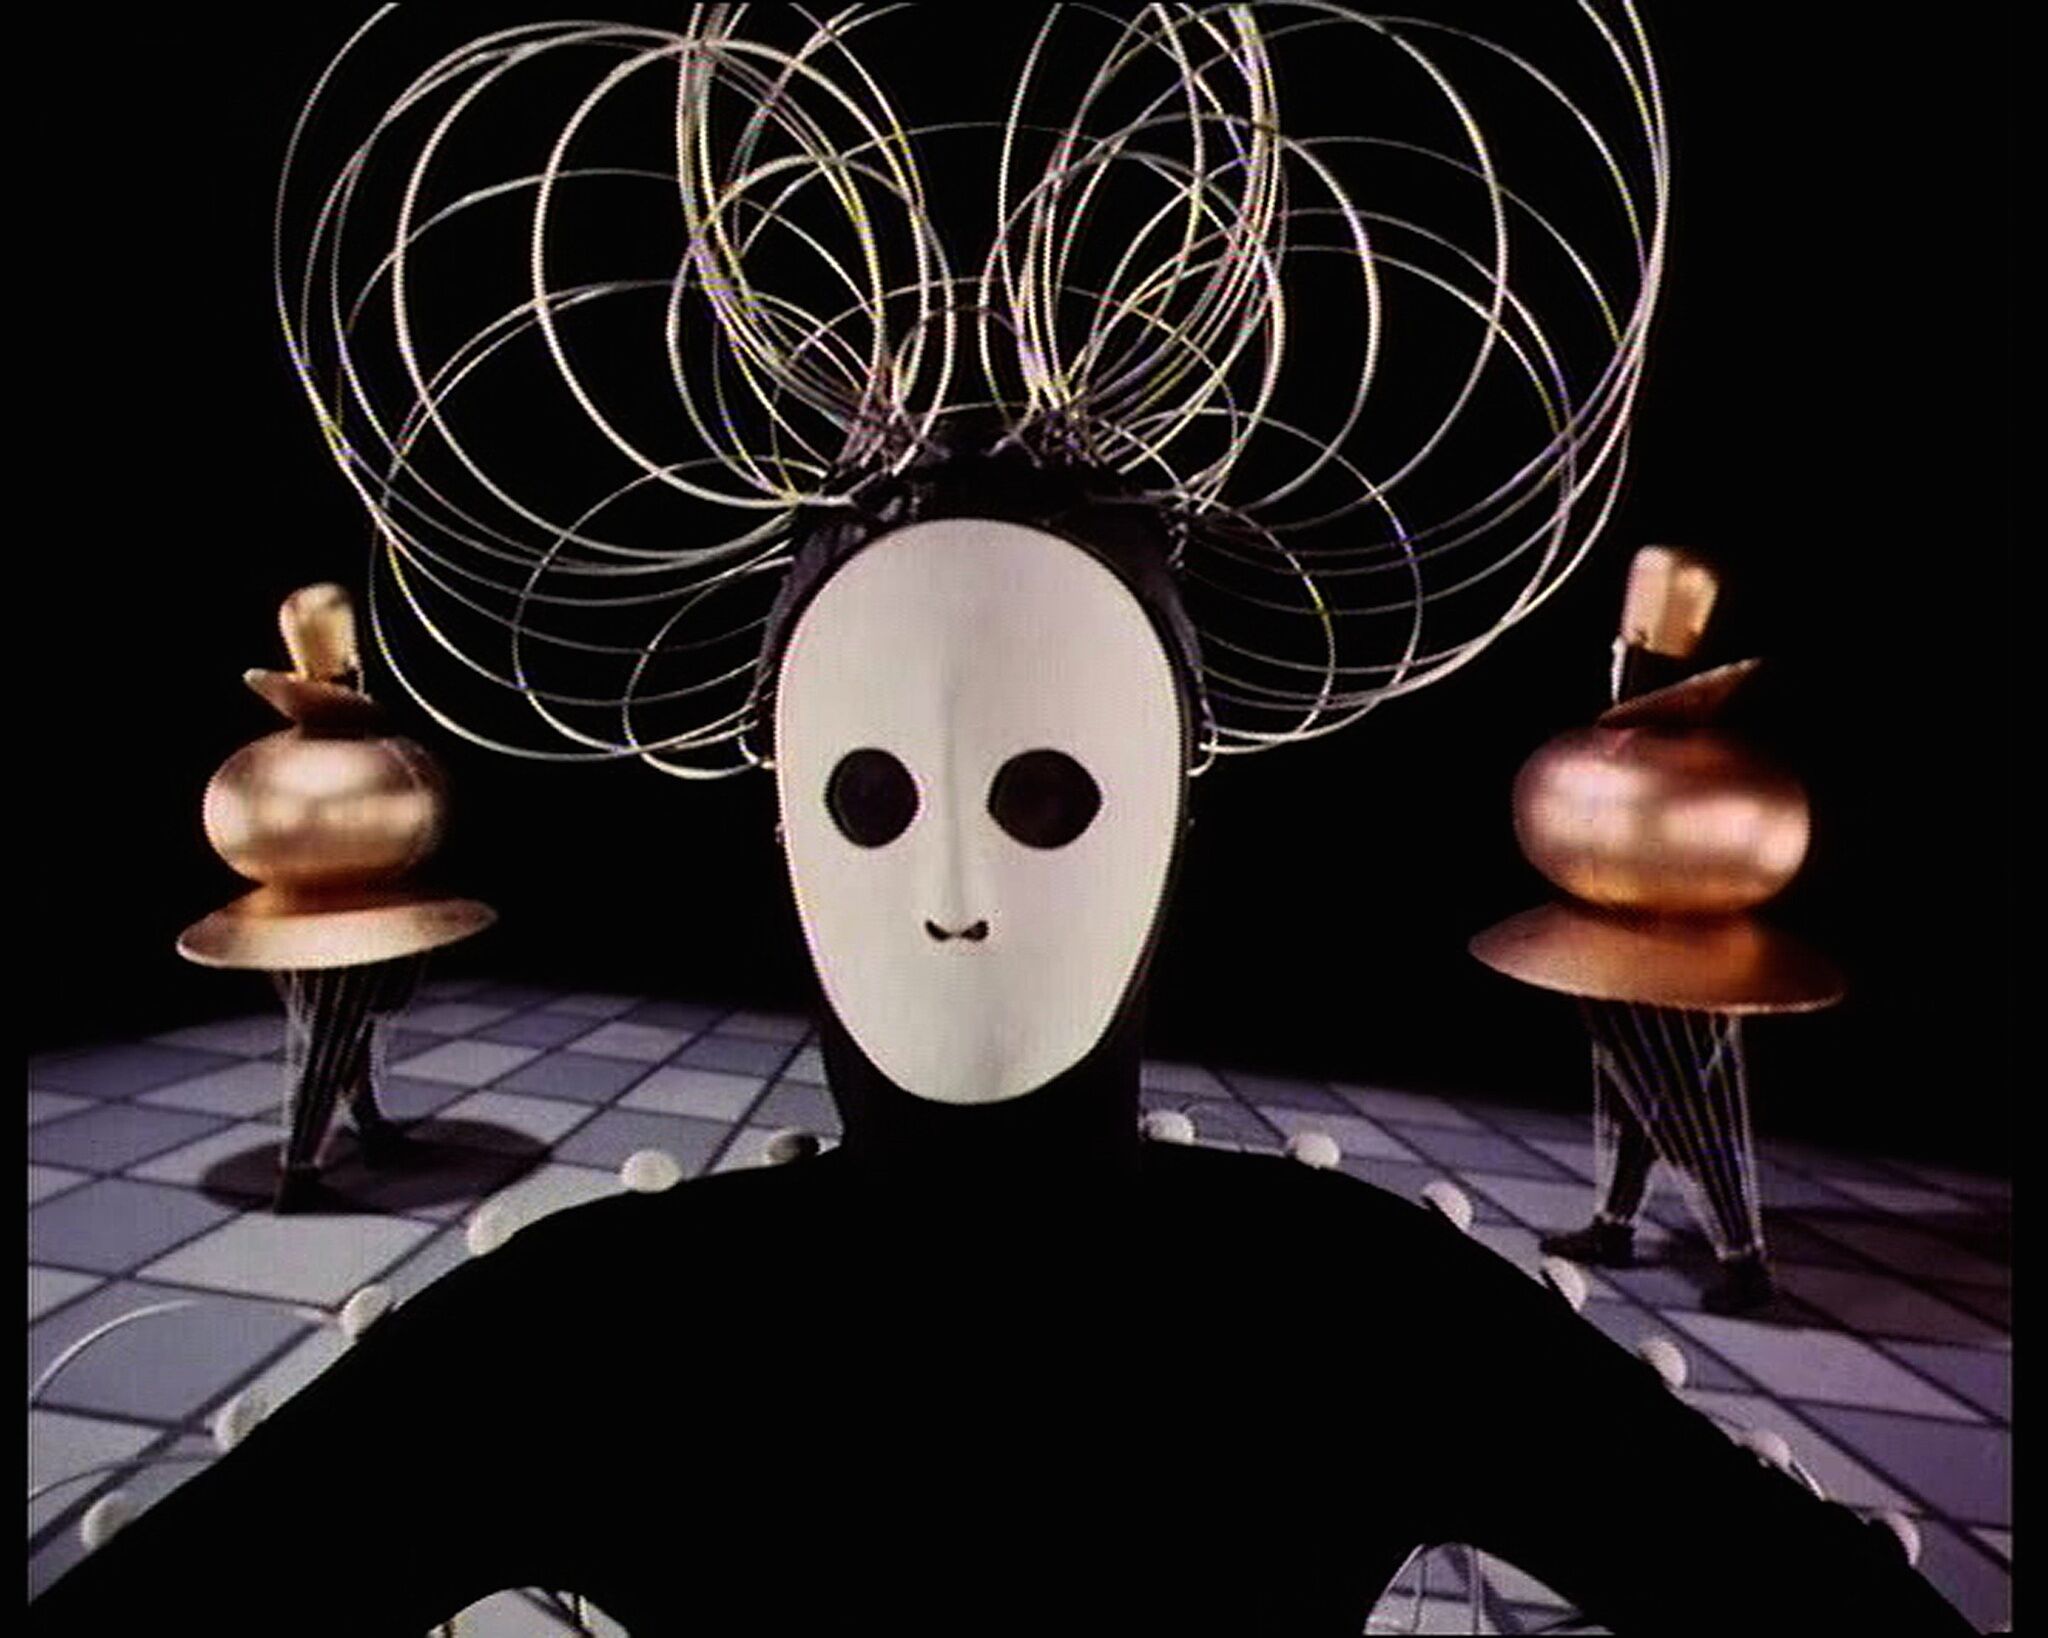 Film still of a dancer figure dressed in black and wearing a white mask